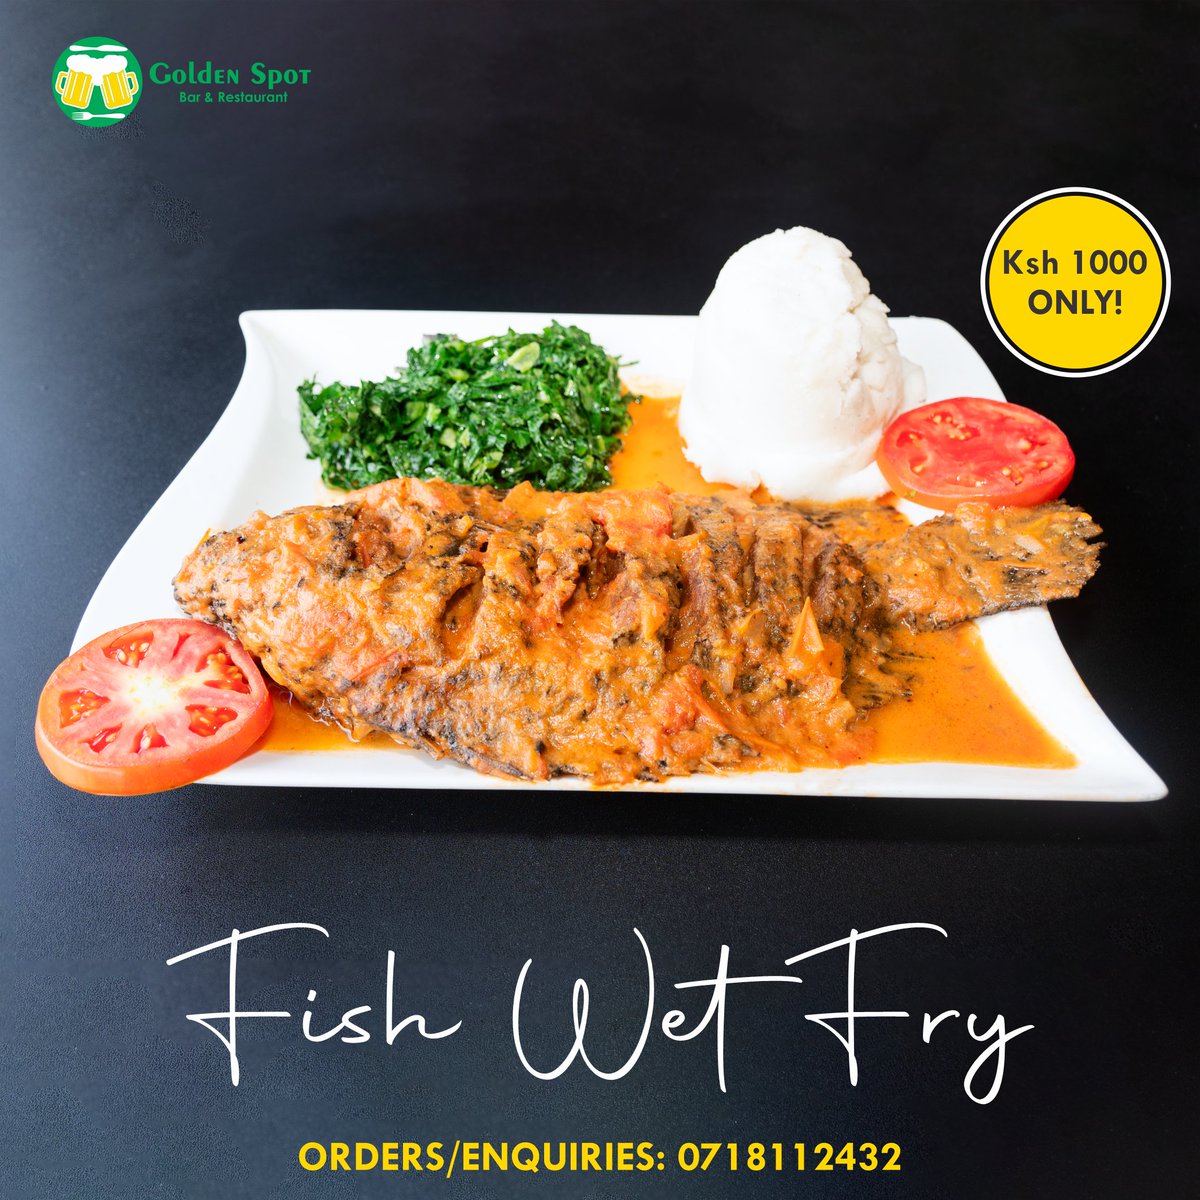 Furahi day na Fish Wet Fry for lunch! For orders call 0718112432 (T&C Apply) 
#fridayvibes #gspot # like #friday #FoodSpot #FoodieFavorites #FoodieFavorites #foodie